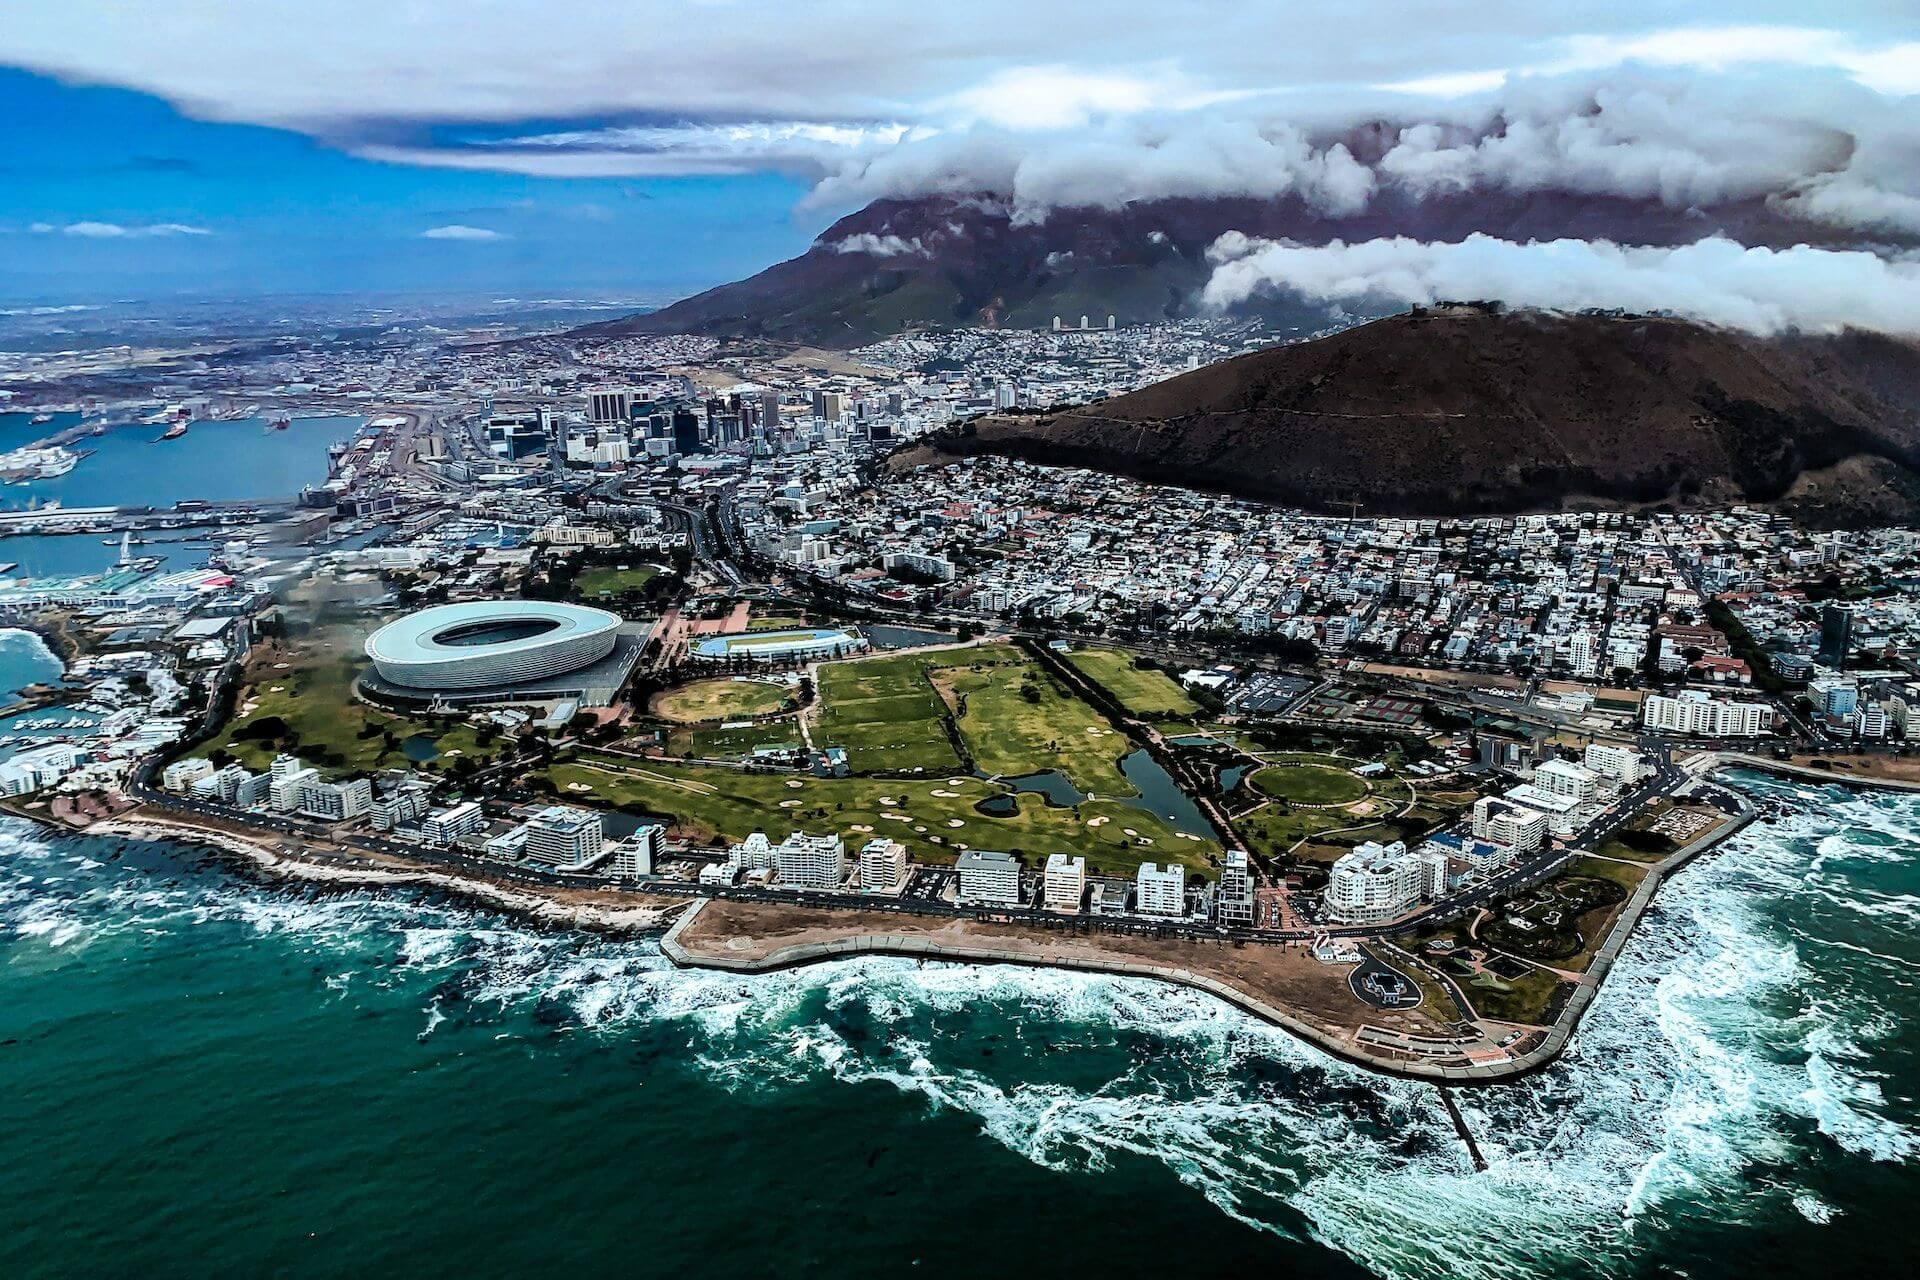 A view of the capital city of South Africa, Cape Town